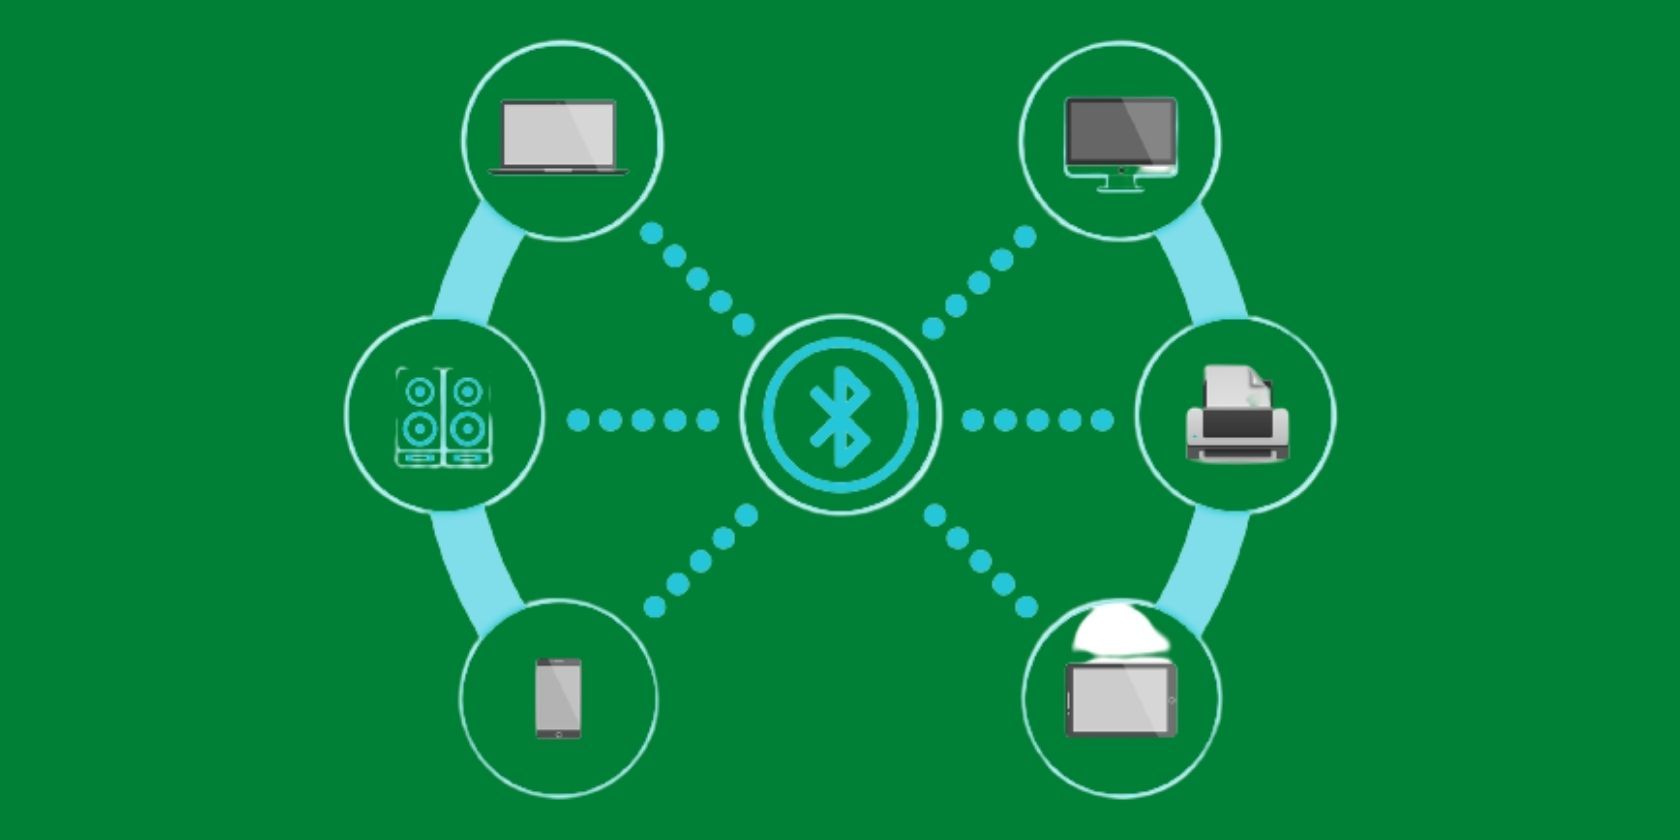 Different devices surrounding the Bluetooth symbol over a green background.